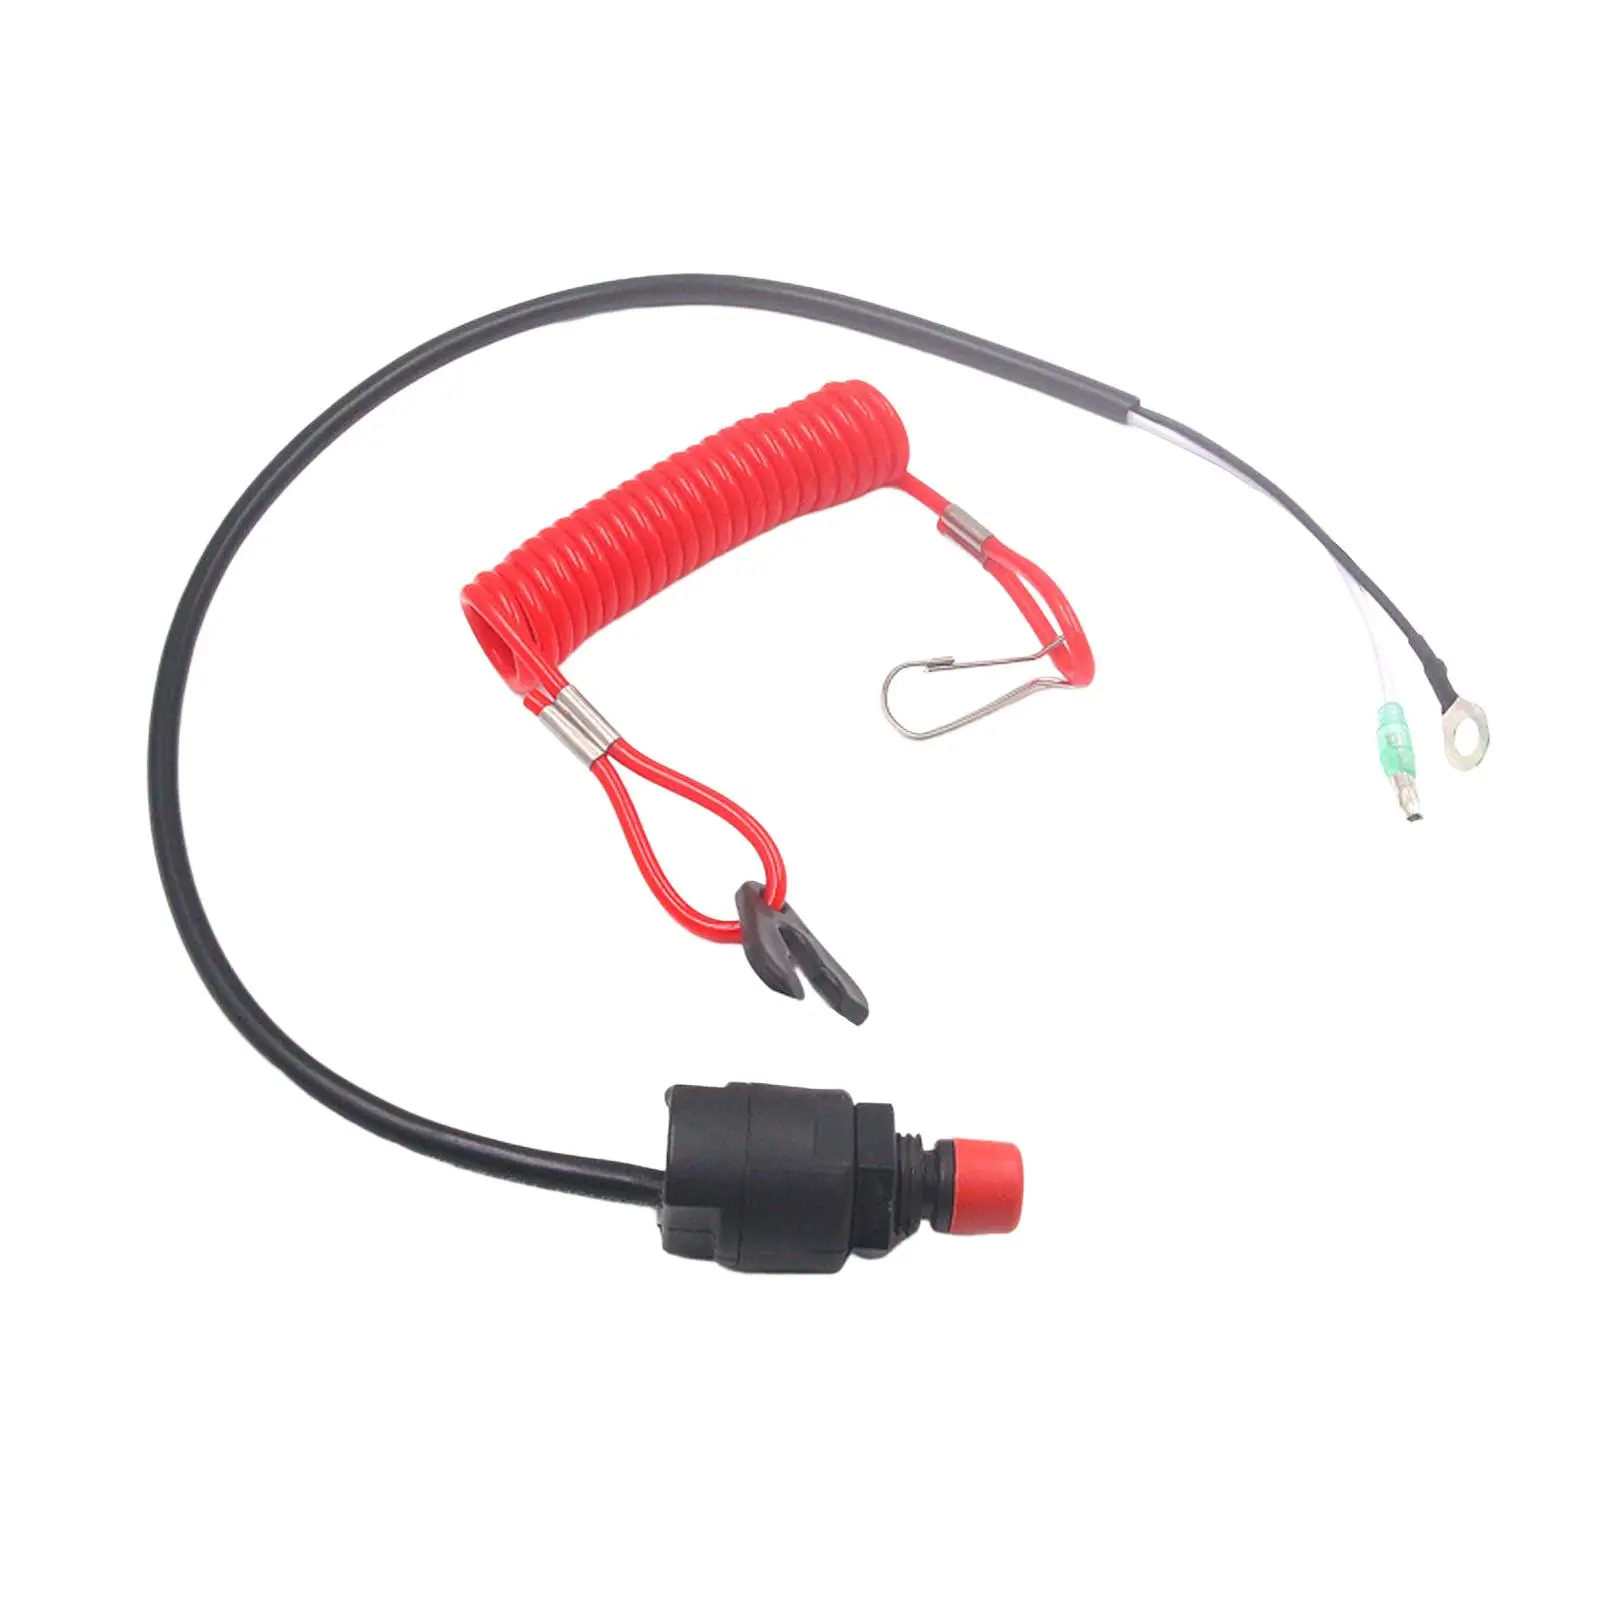 Flexible Boat Outboard Switch Engine Motor Emergency Kill Stop Switch for Boat Outboard Yacht Parts Accessories Replacement